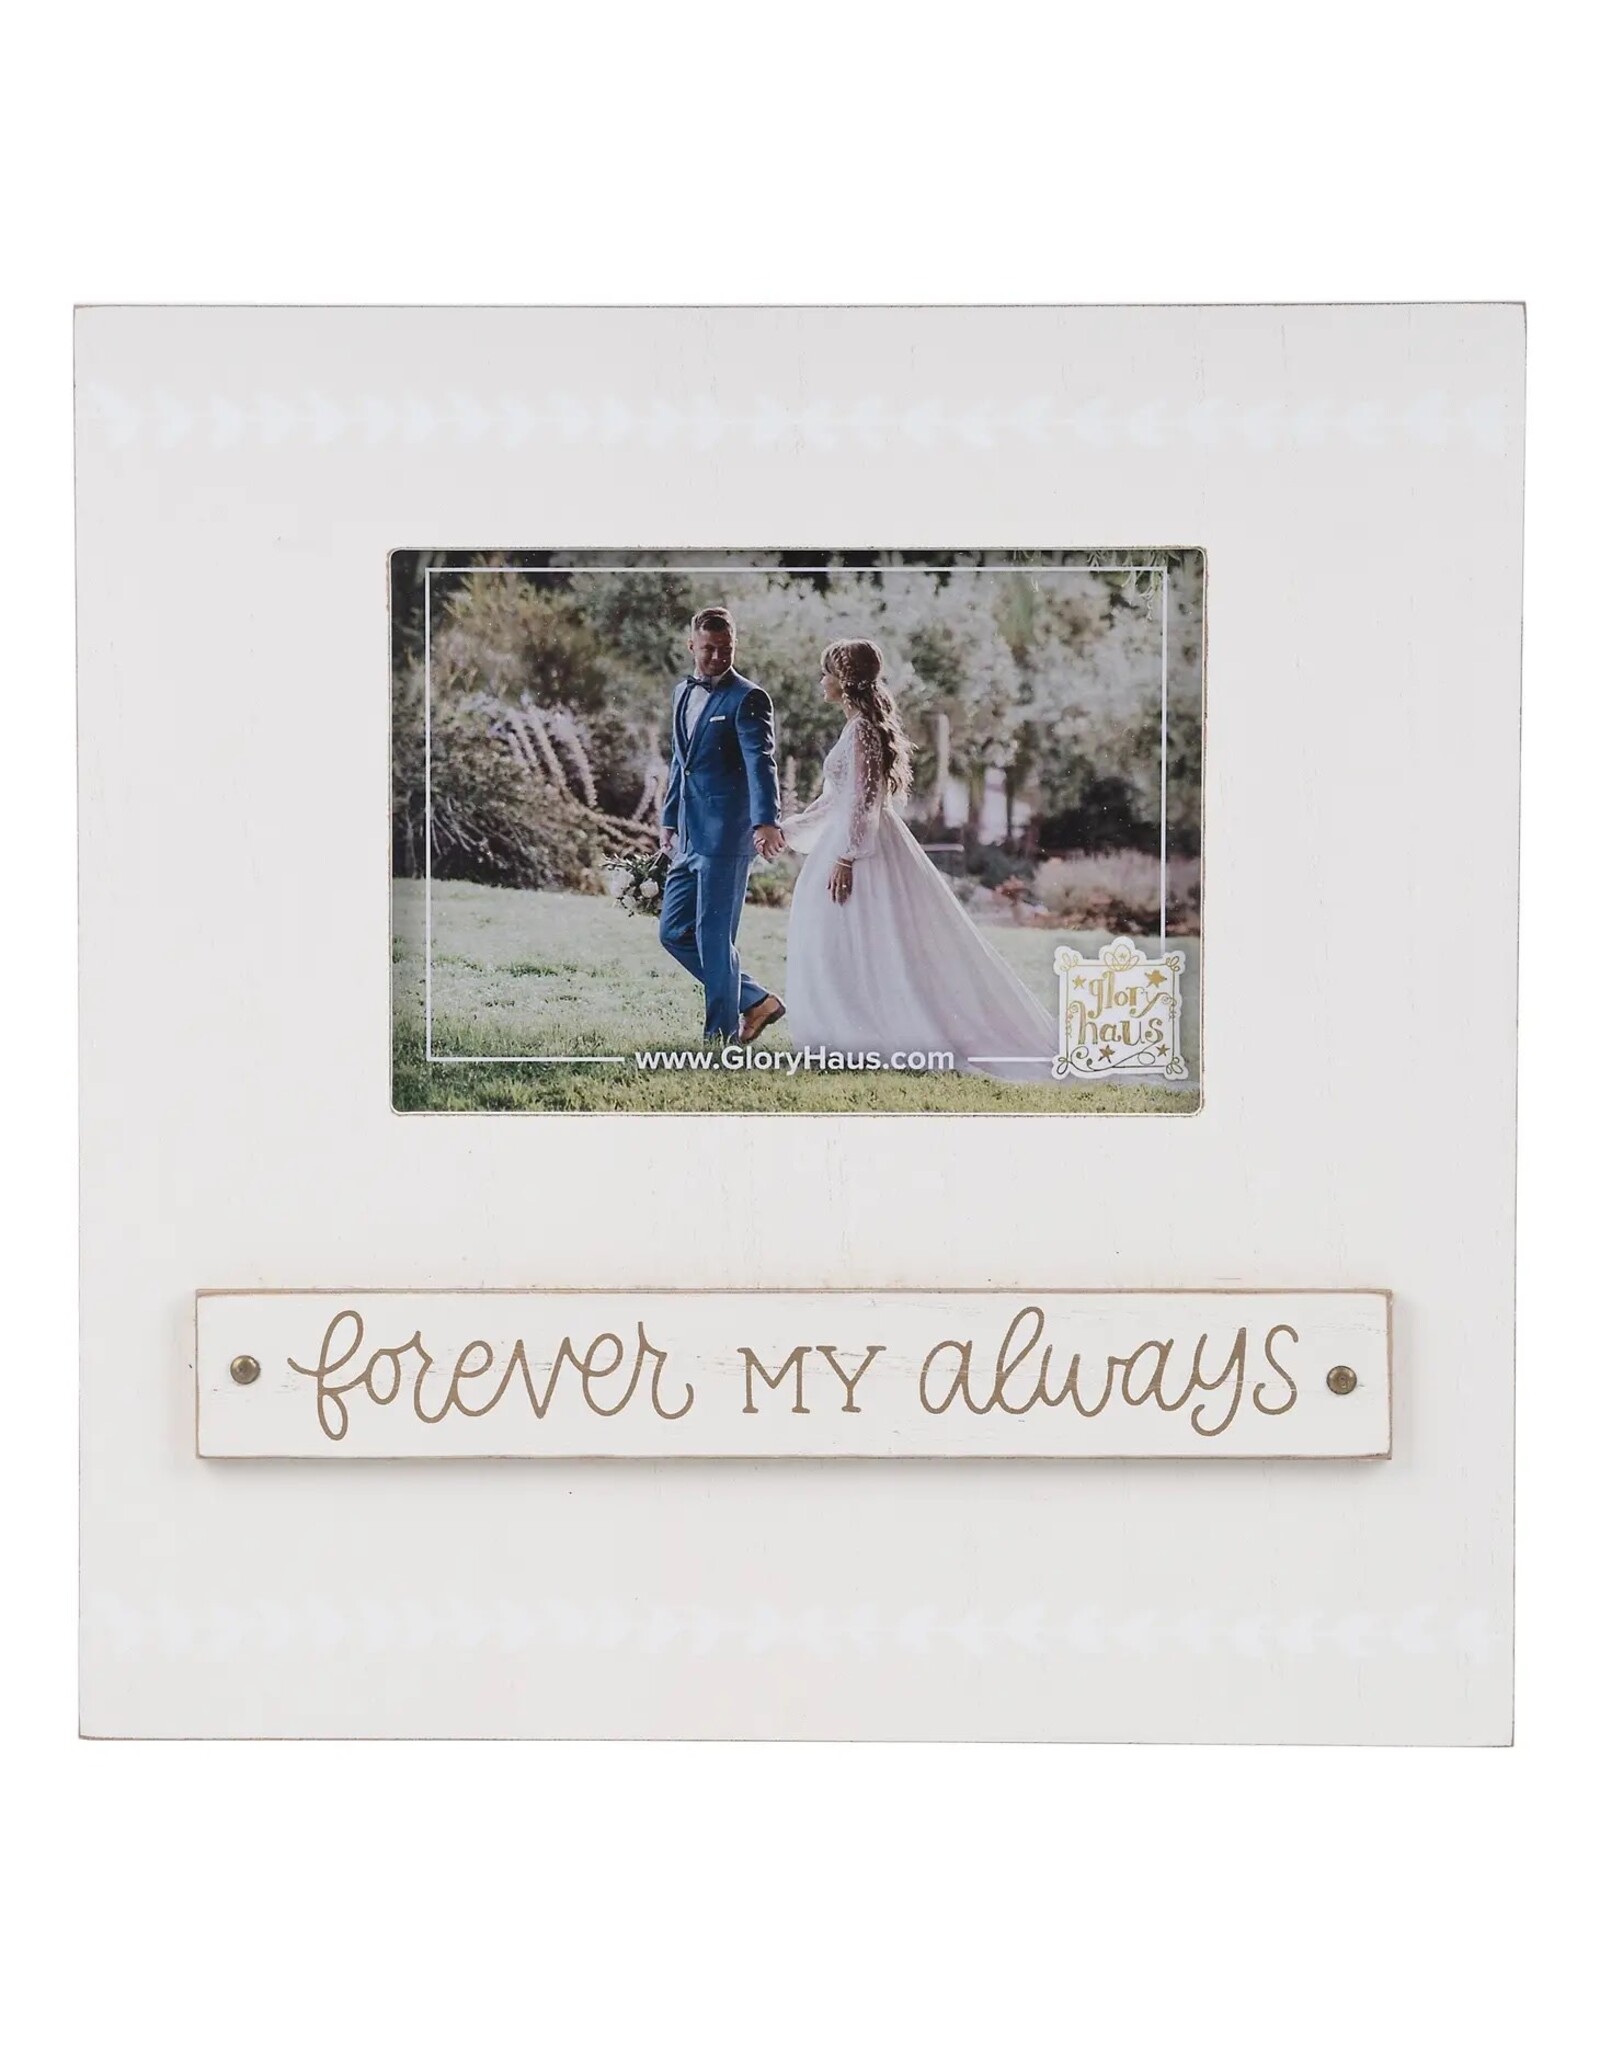 Glory Haus Forever My Always Frame 5x 7